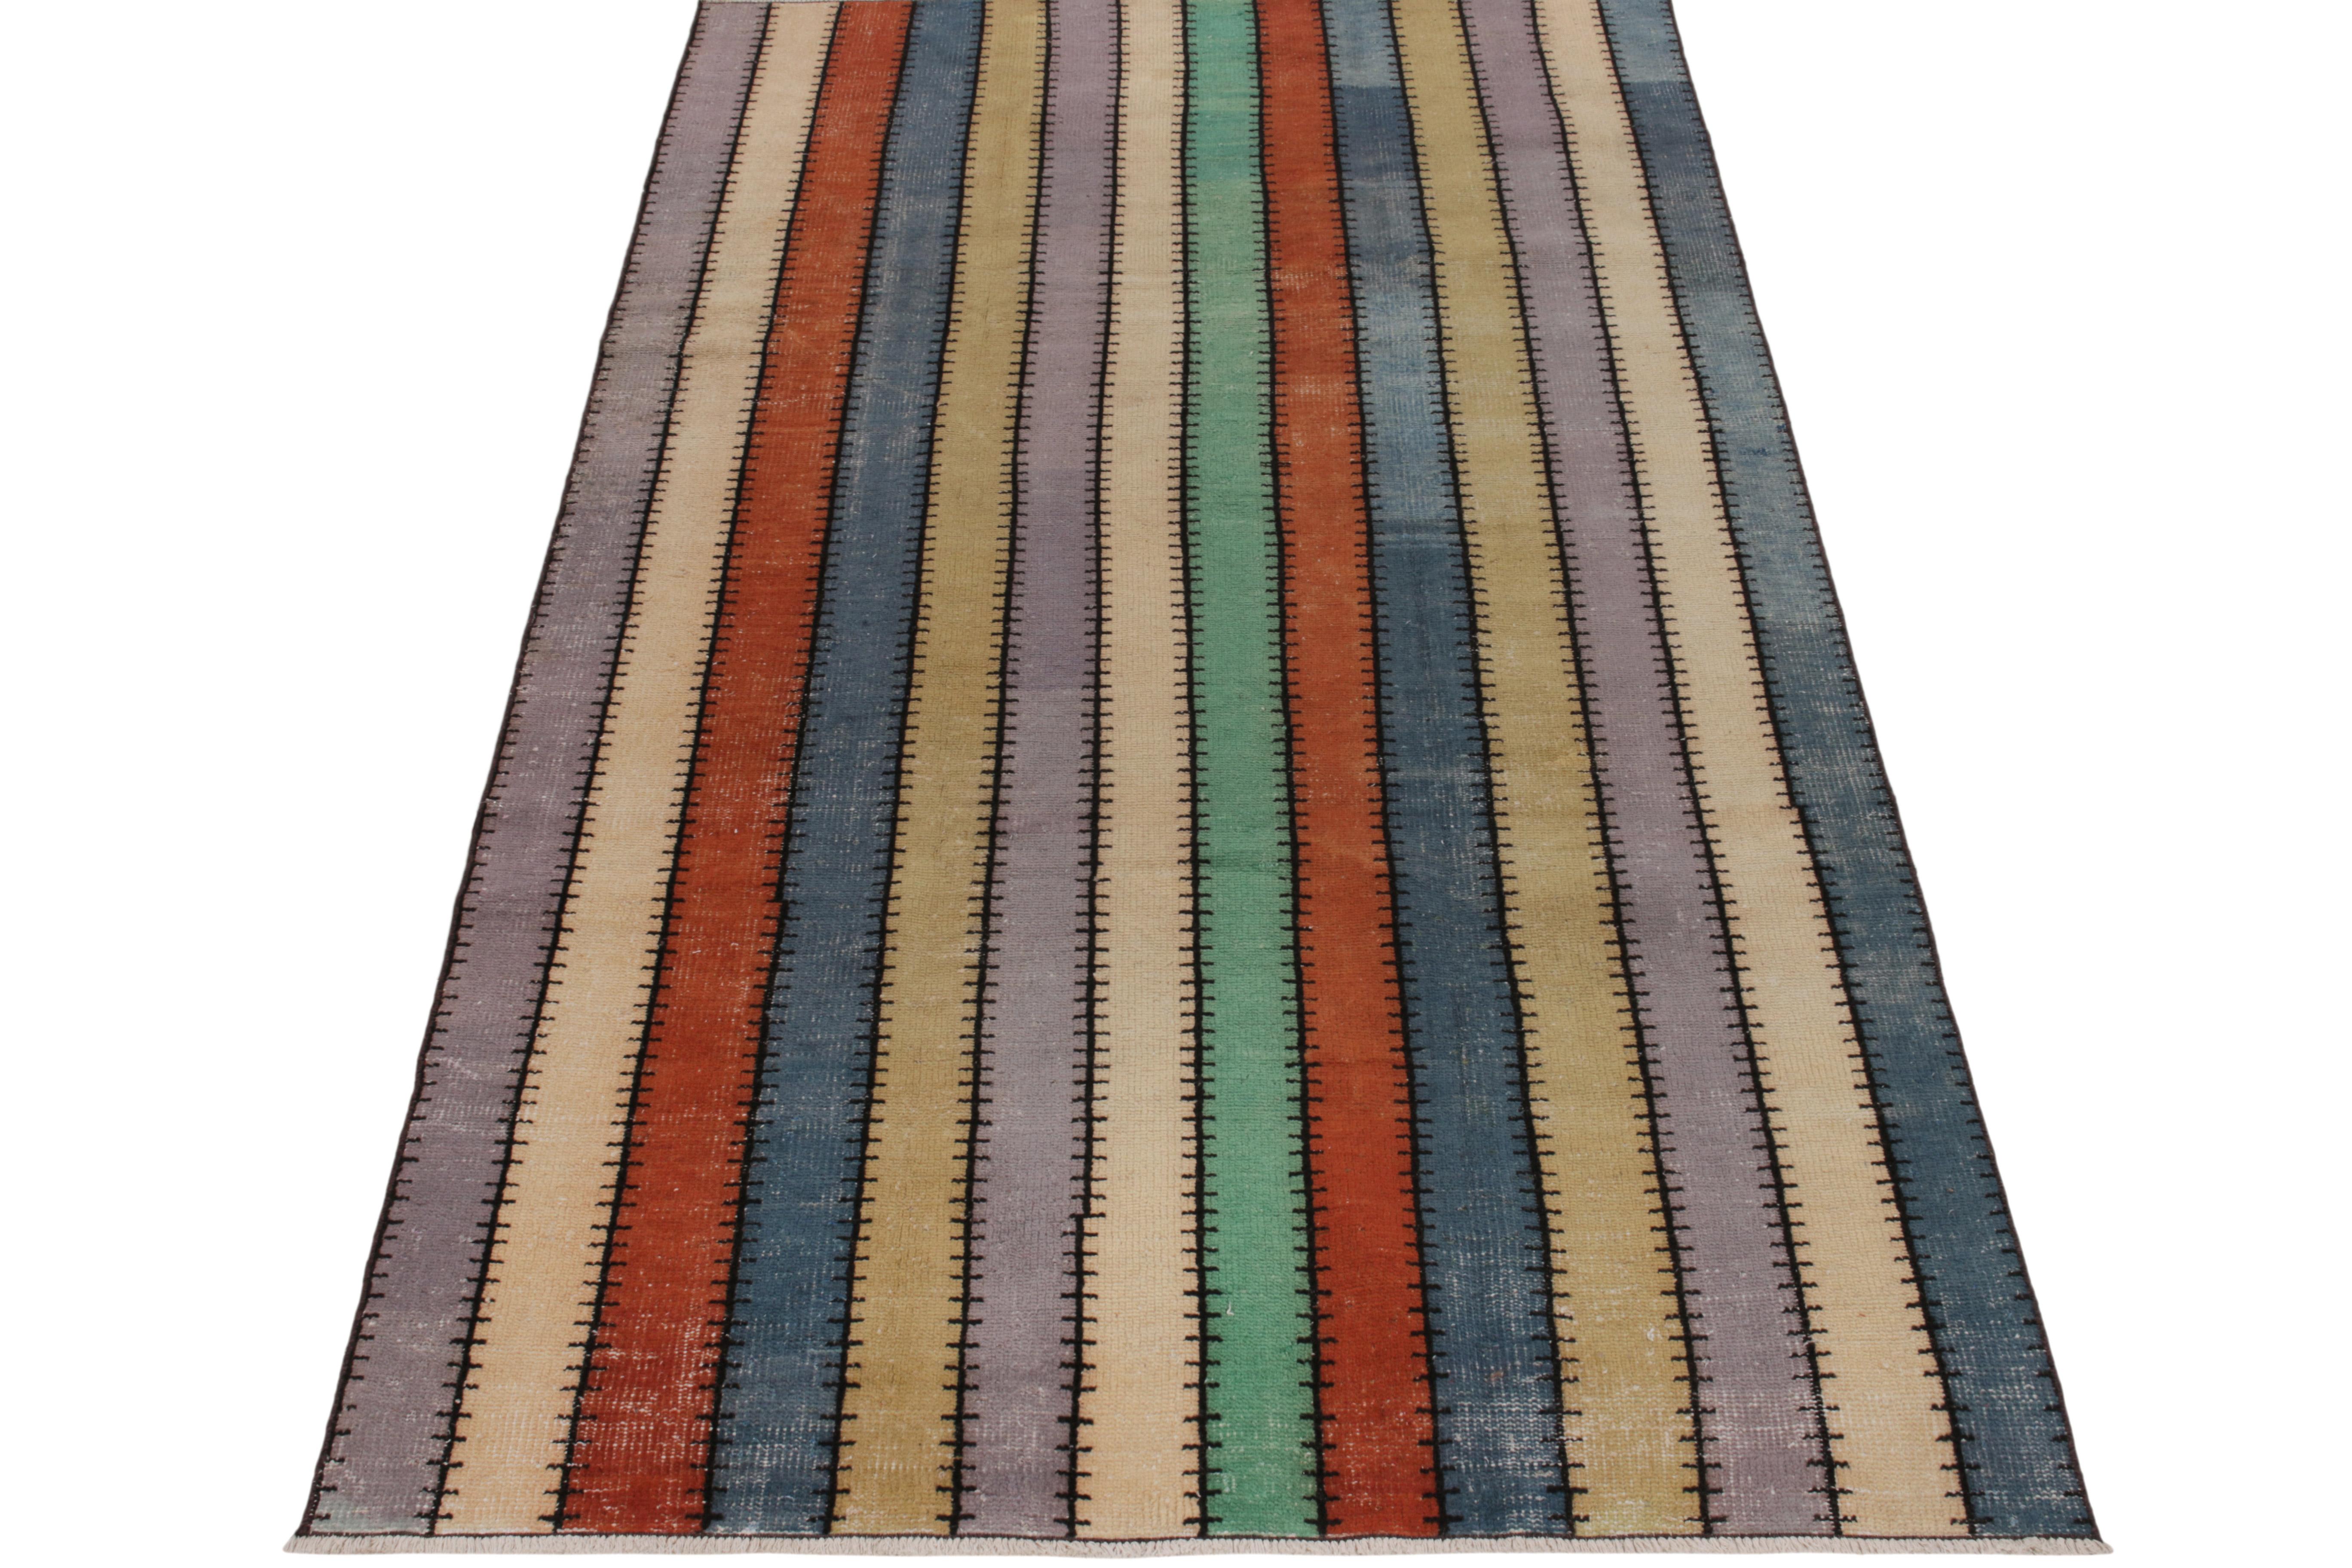 Hand-knotted in wool, a 5x9 vintage rug from a bold multidisciplinary Turkish designer commemorated in Rug & Kilim’s Mid-Century Pasha Collection. Featuring a neat striped pattern in tones of blue, red, beige, green & lilac, the rug exemplifies